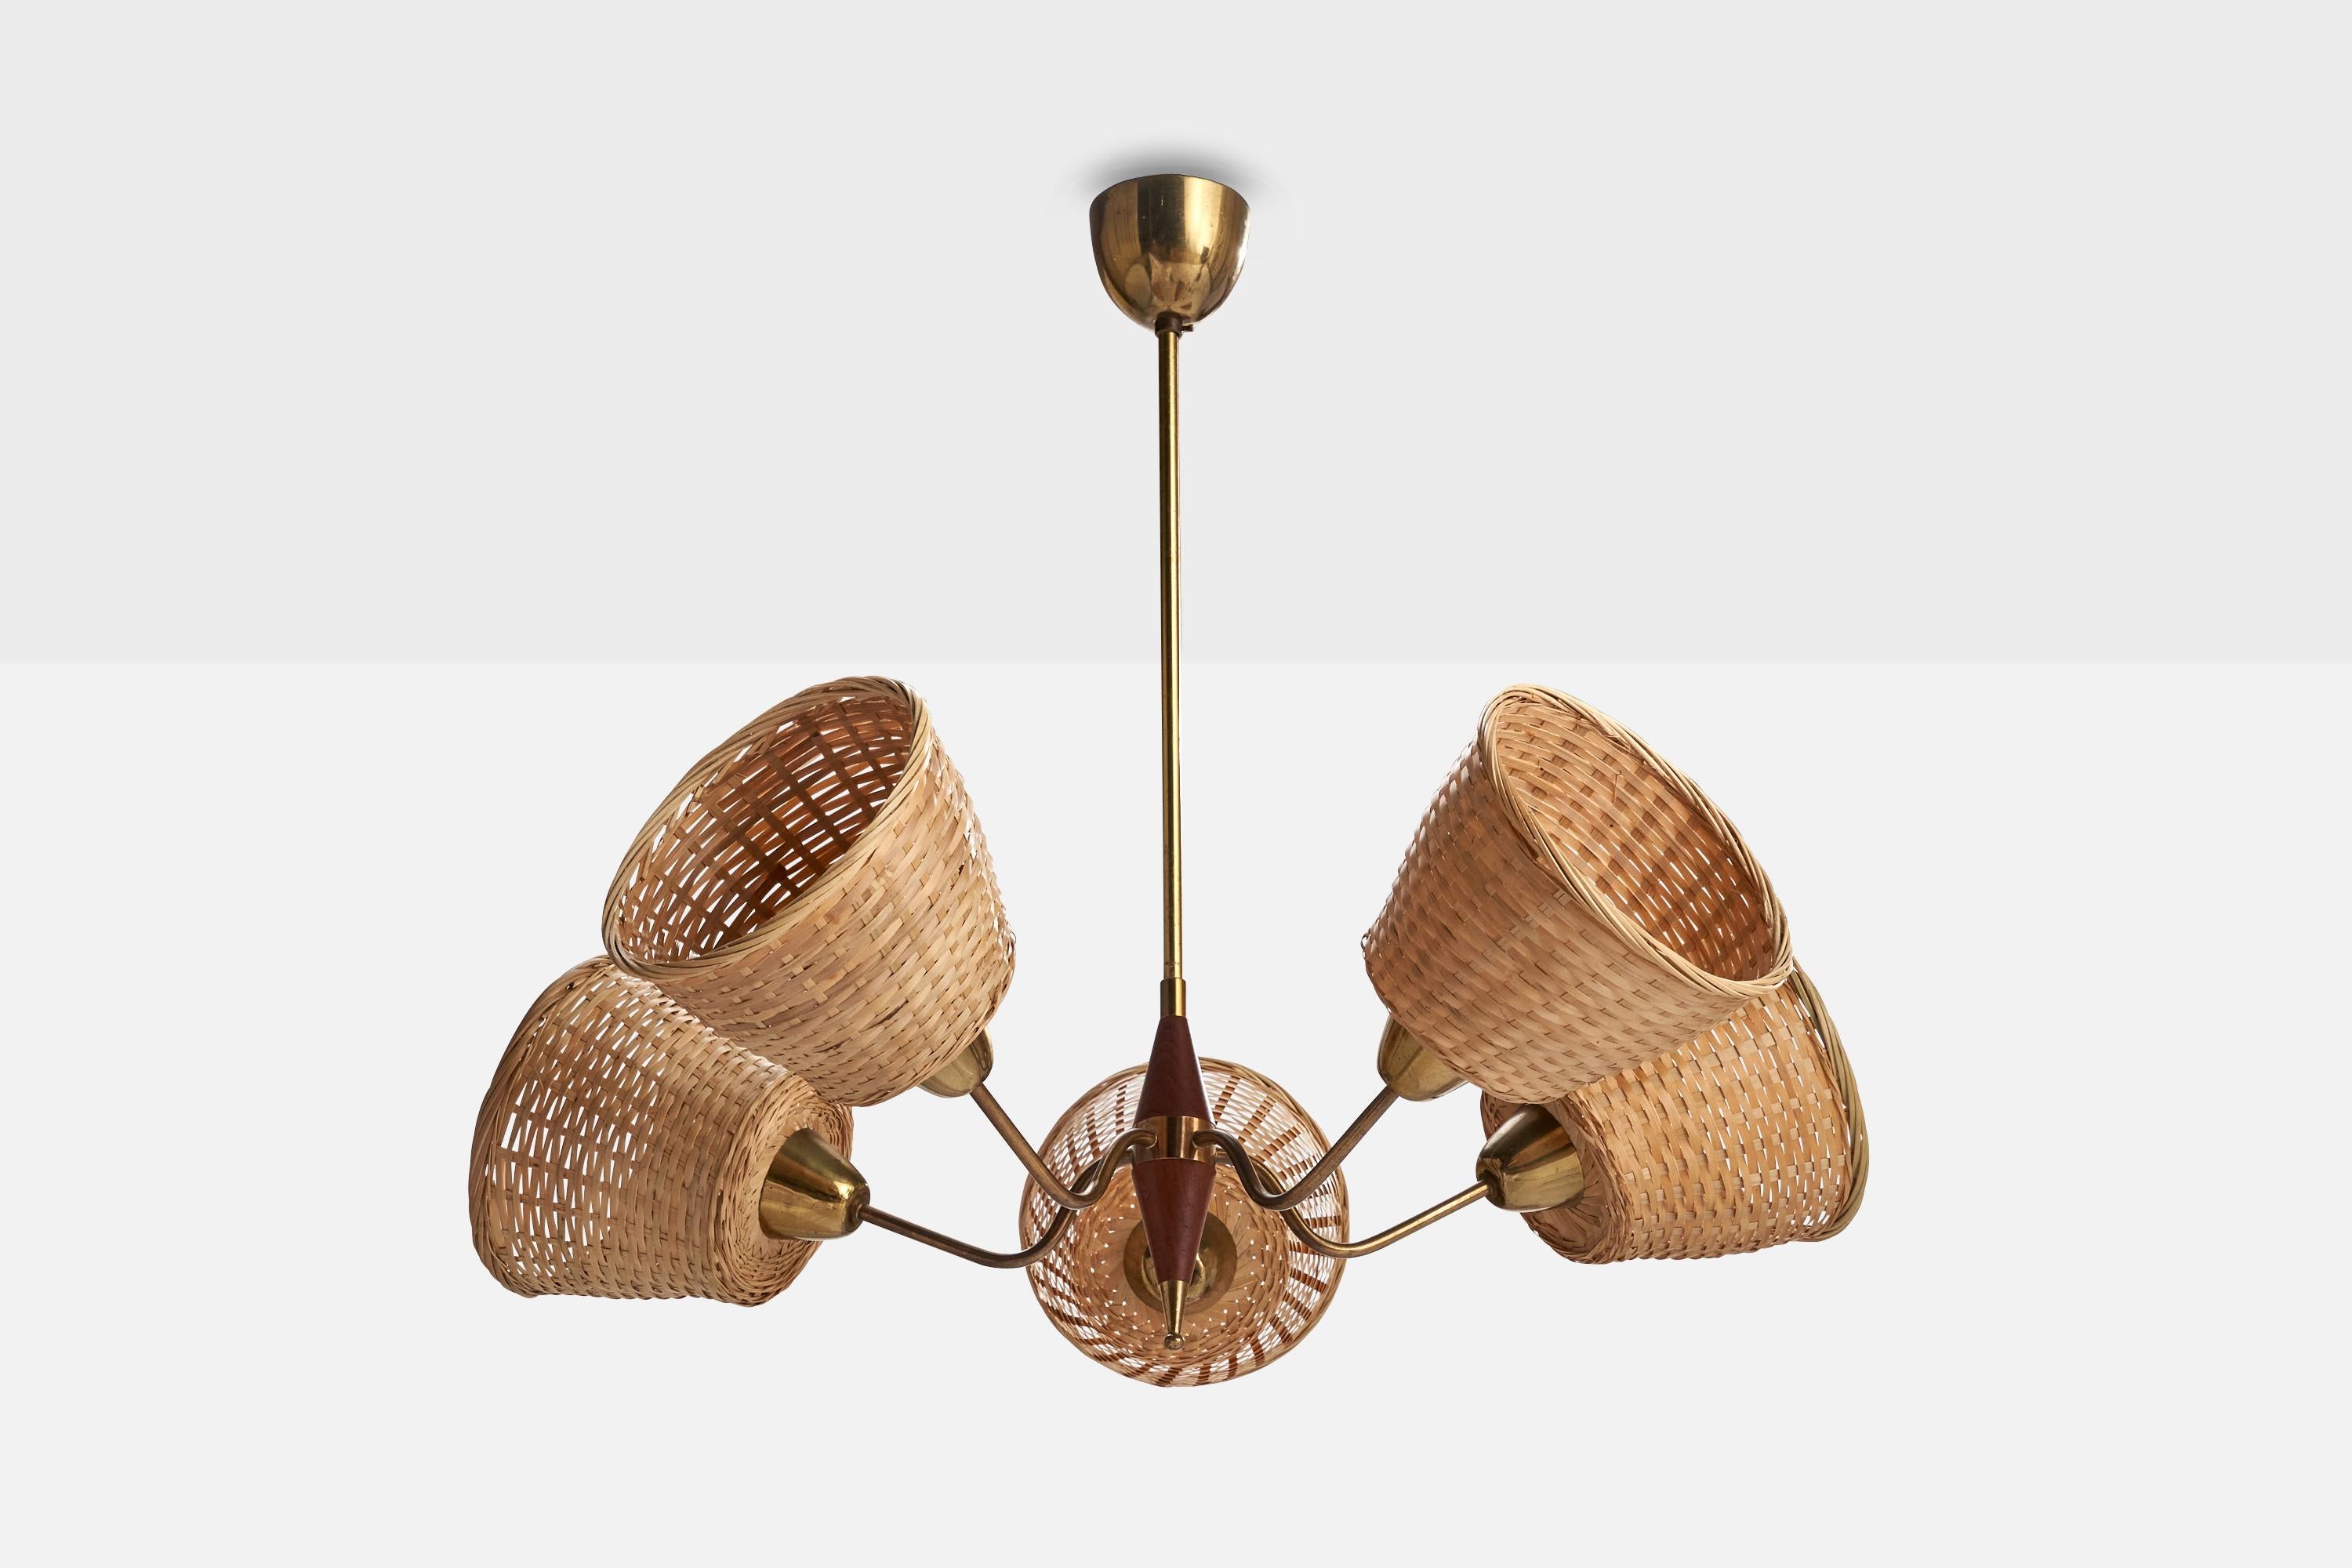 A brass, teak and rattan chandelier designed and produced in Sweden, c. 1950s.

Dimensions of canopy (inches): 3.20” H x 2.70” Diameter
Socket takes standard E-26 bulbs. 5 socket.There is no maximum wattage stated on the fixture. All lighting will